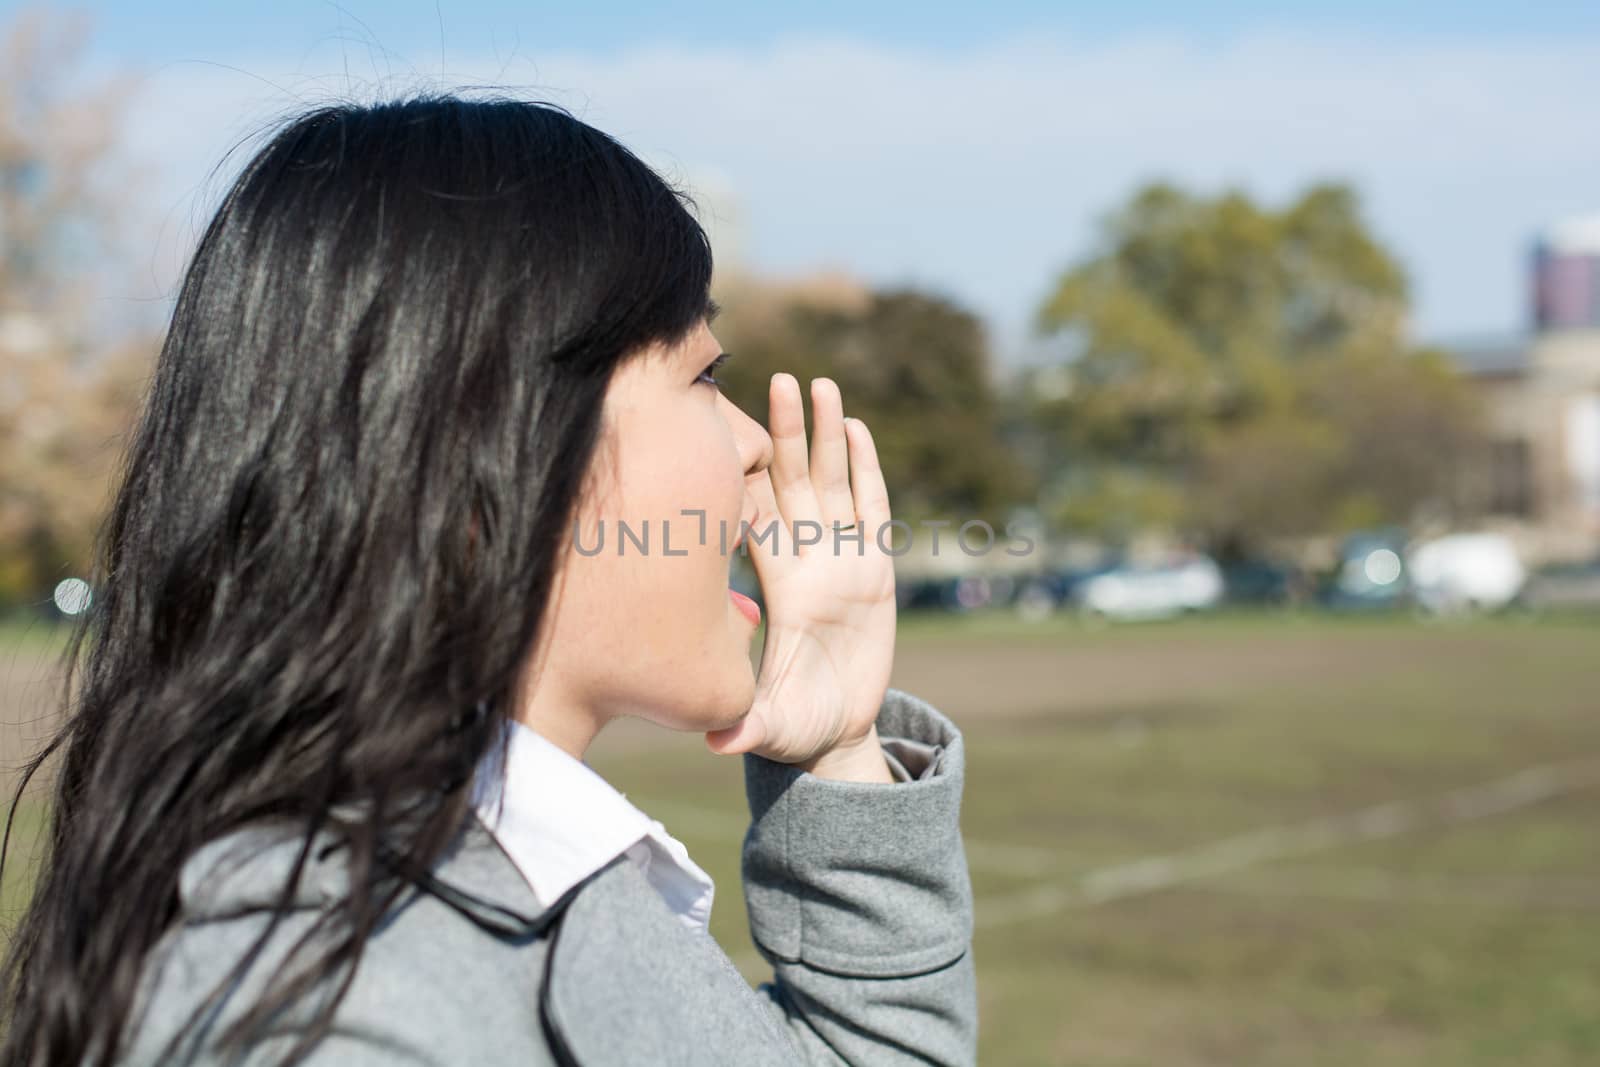 Outdoor portrait of young woman yelling at someone